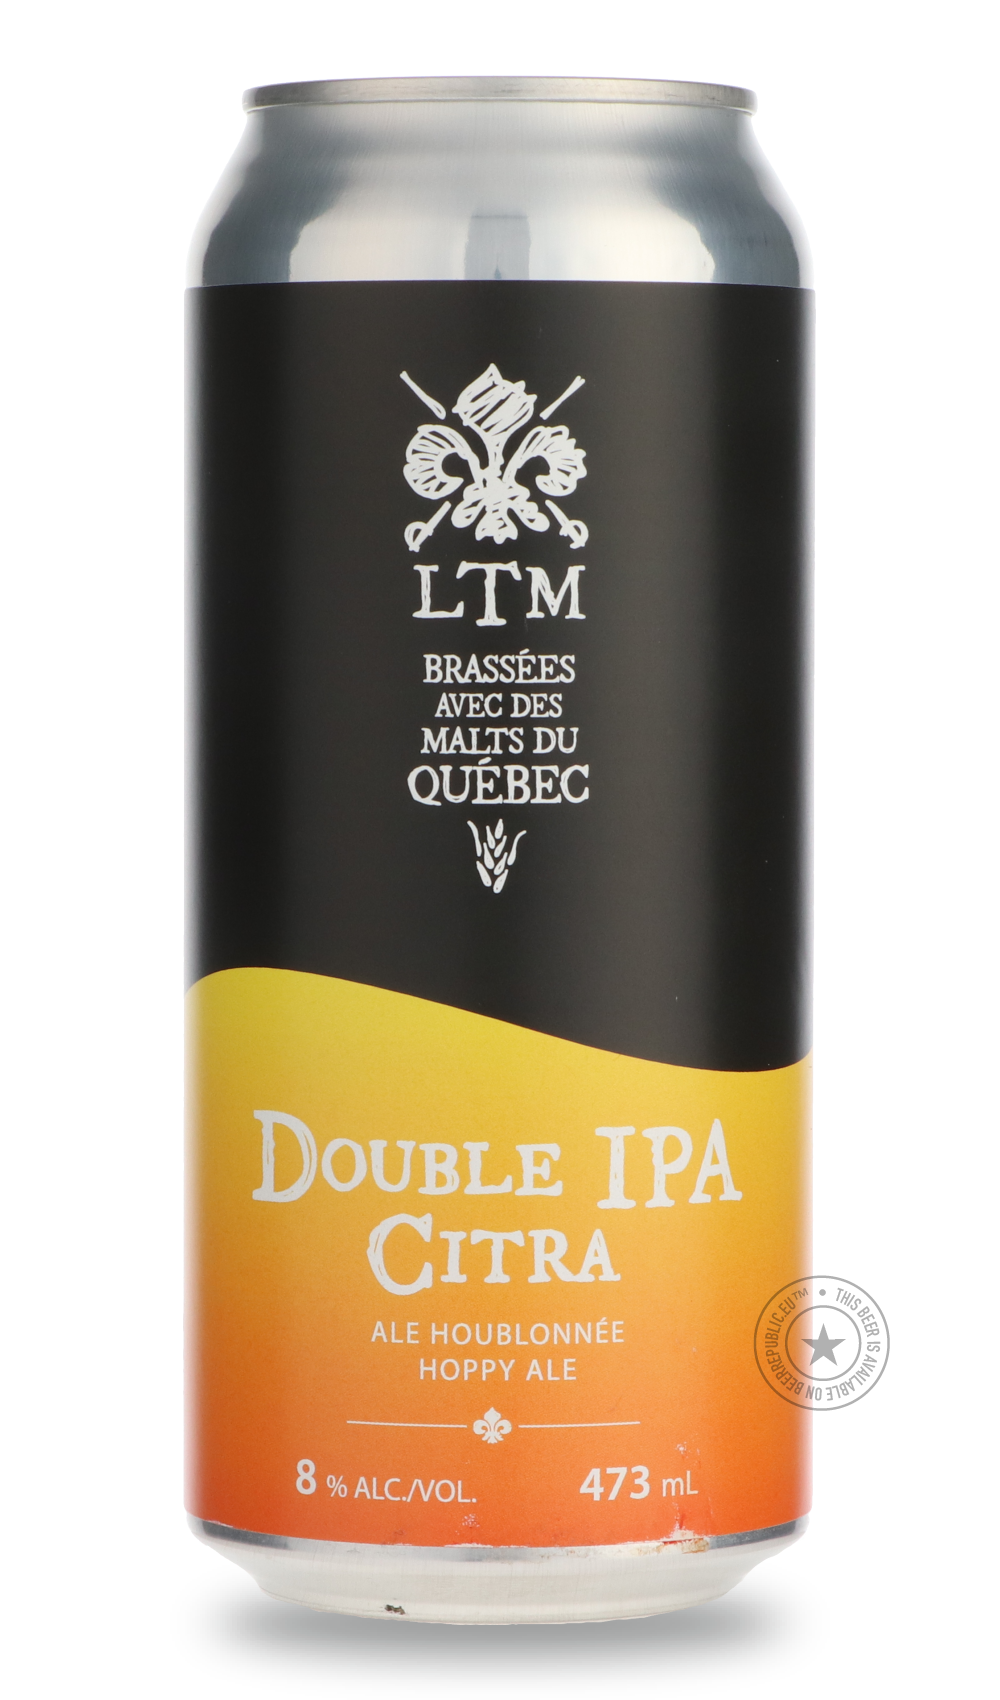 -Les Trois Mousquetaires- Double IPA Citra-IPA- Only @ Beer Republic - The best online beer store for American & Canadian craft beer - Buy beer online from the USA and Canada - Bier online kopen - Amerikaans bier kopen - Craft beer store - Craft beer kopen - Amerikanisch bier kaufen - Bier online kaufen - Acheter biere online - IPA - Stout - Porter - New England IPA - Hazy IPA - Imperial Stout - Barrel Aged - Barrel Aged Imperial Stout - Brown - Dark beer - Blond - Blonde - Pilsner - Lager - Wheat - Weizen 